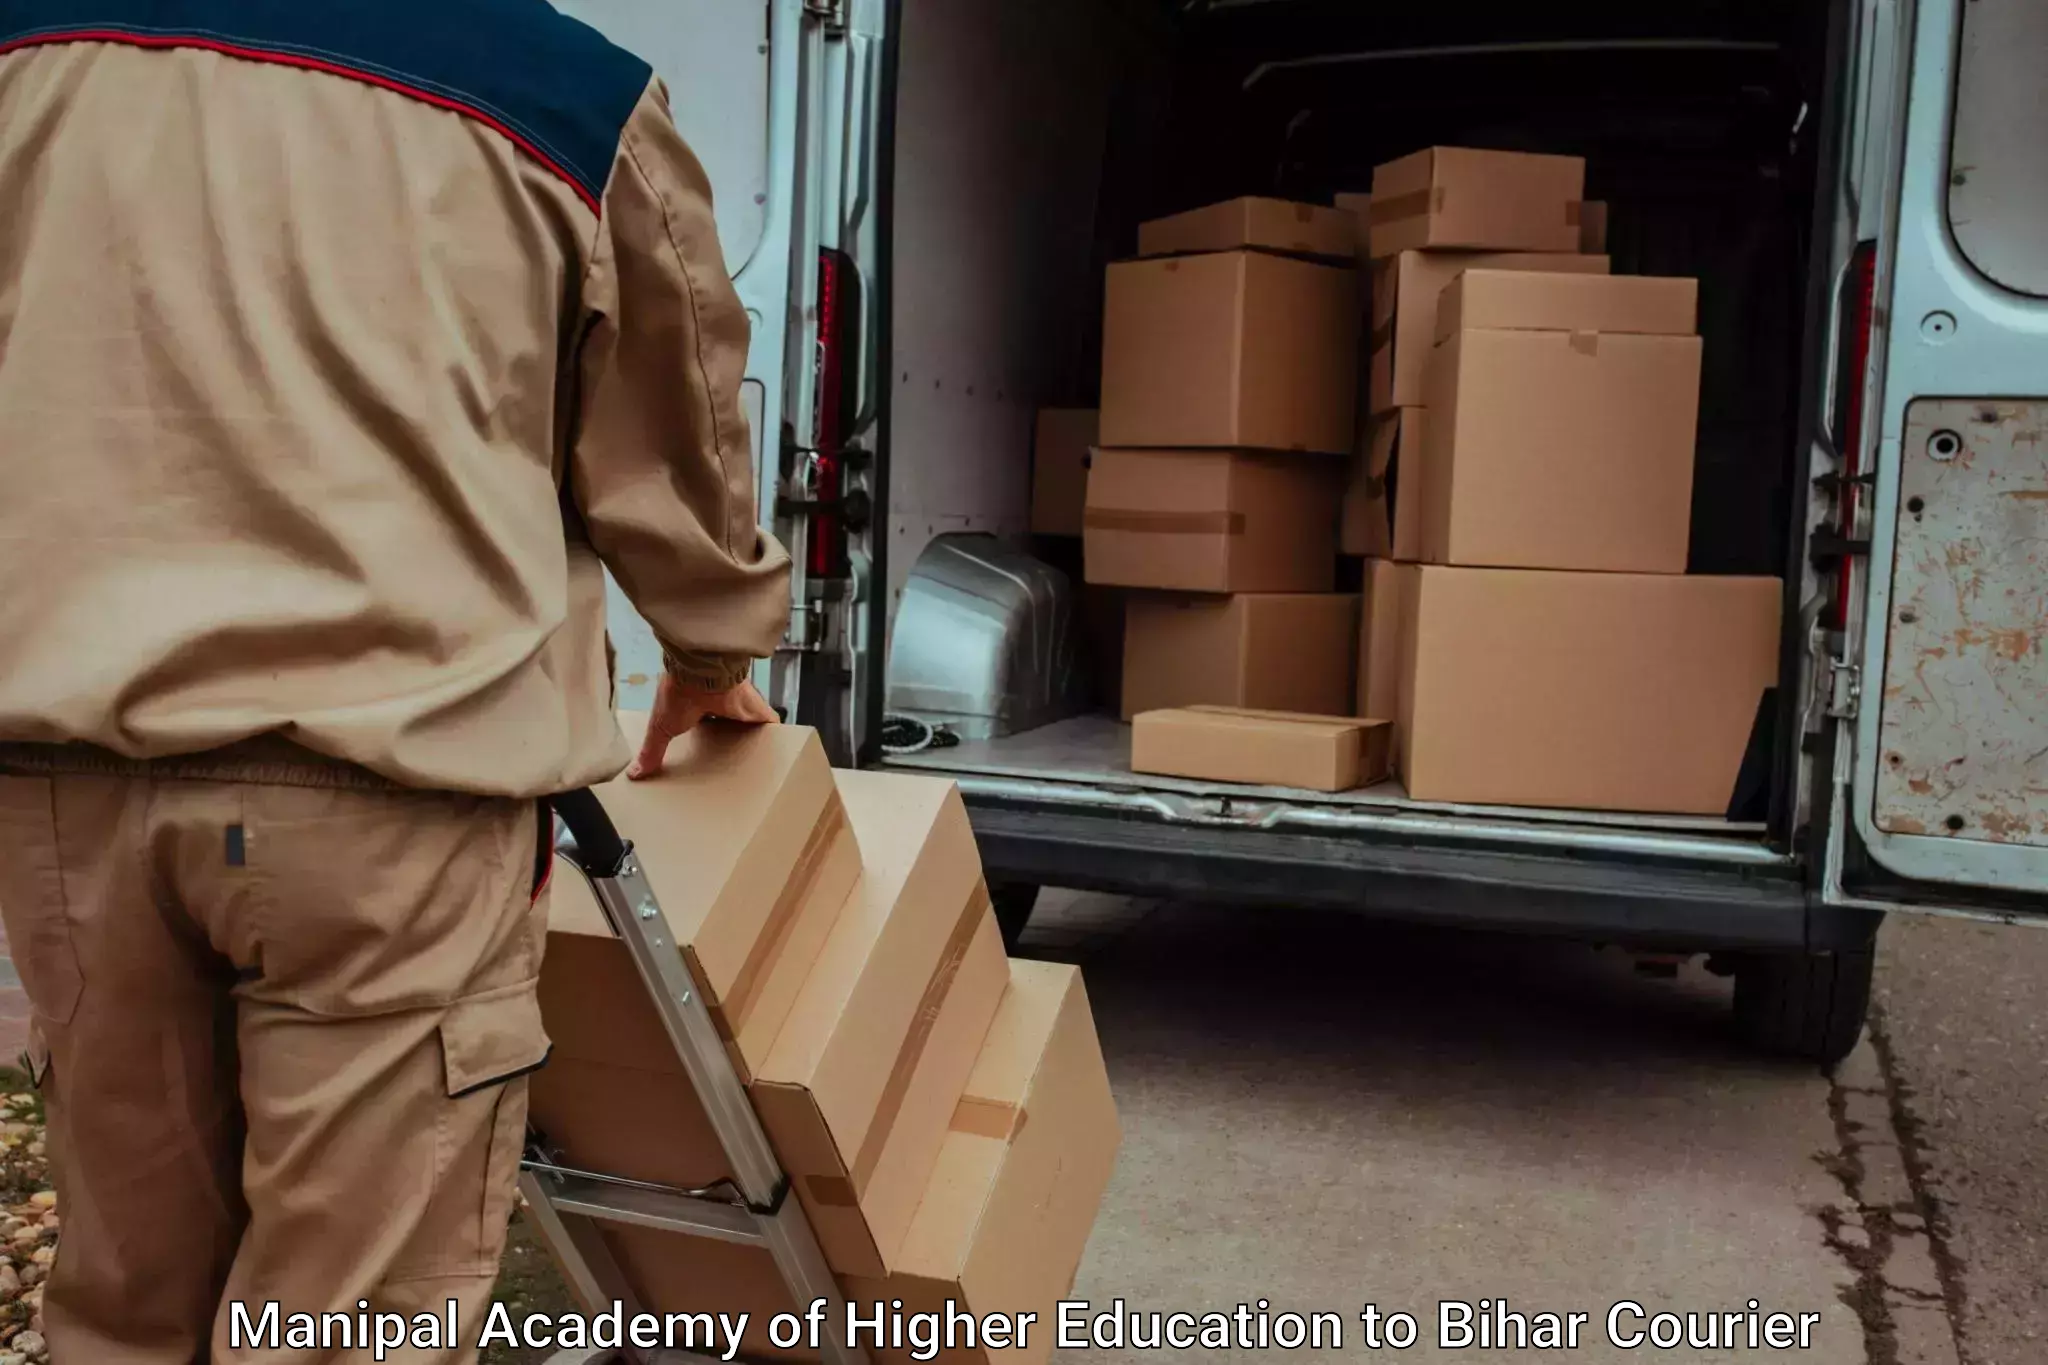 Professional moving assistance Manipal Academy of Higher Education to IIT Patna